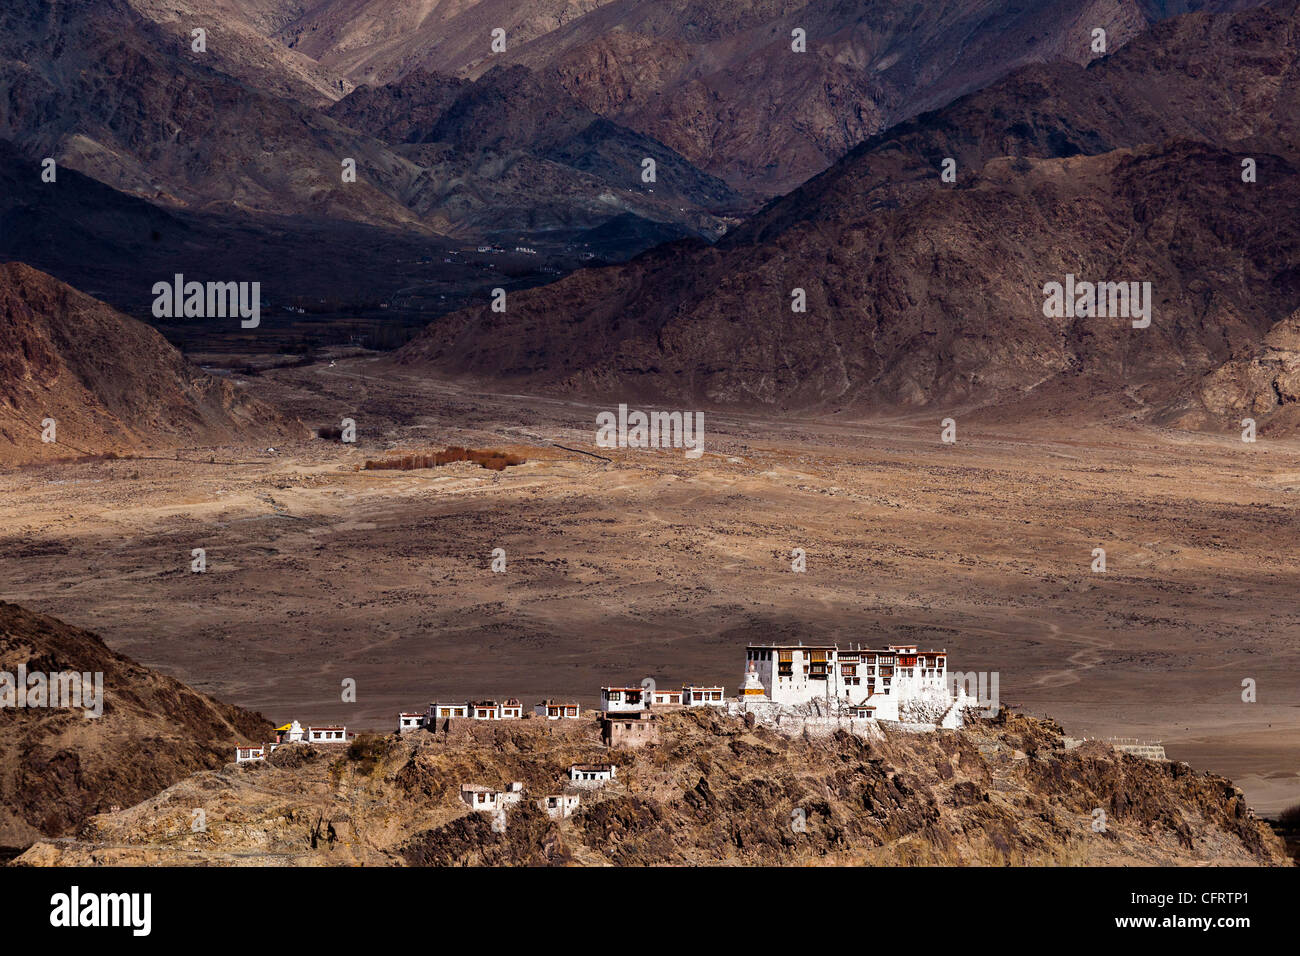 The Stakna monastery perched upon a small hill with the mountains of the Ladakh range looming in the background. Stock Photo